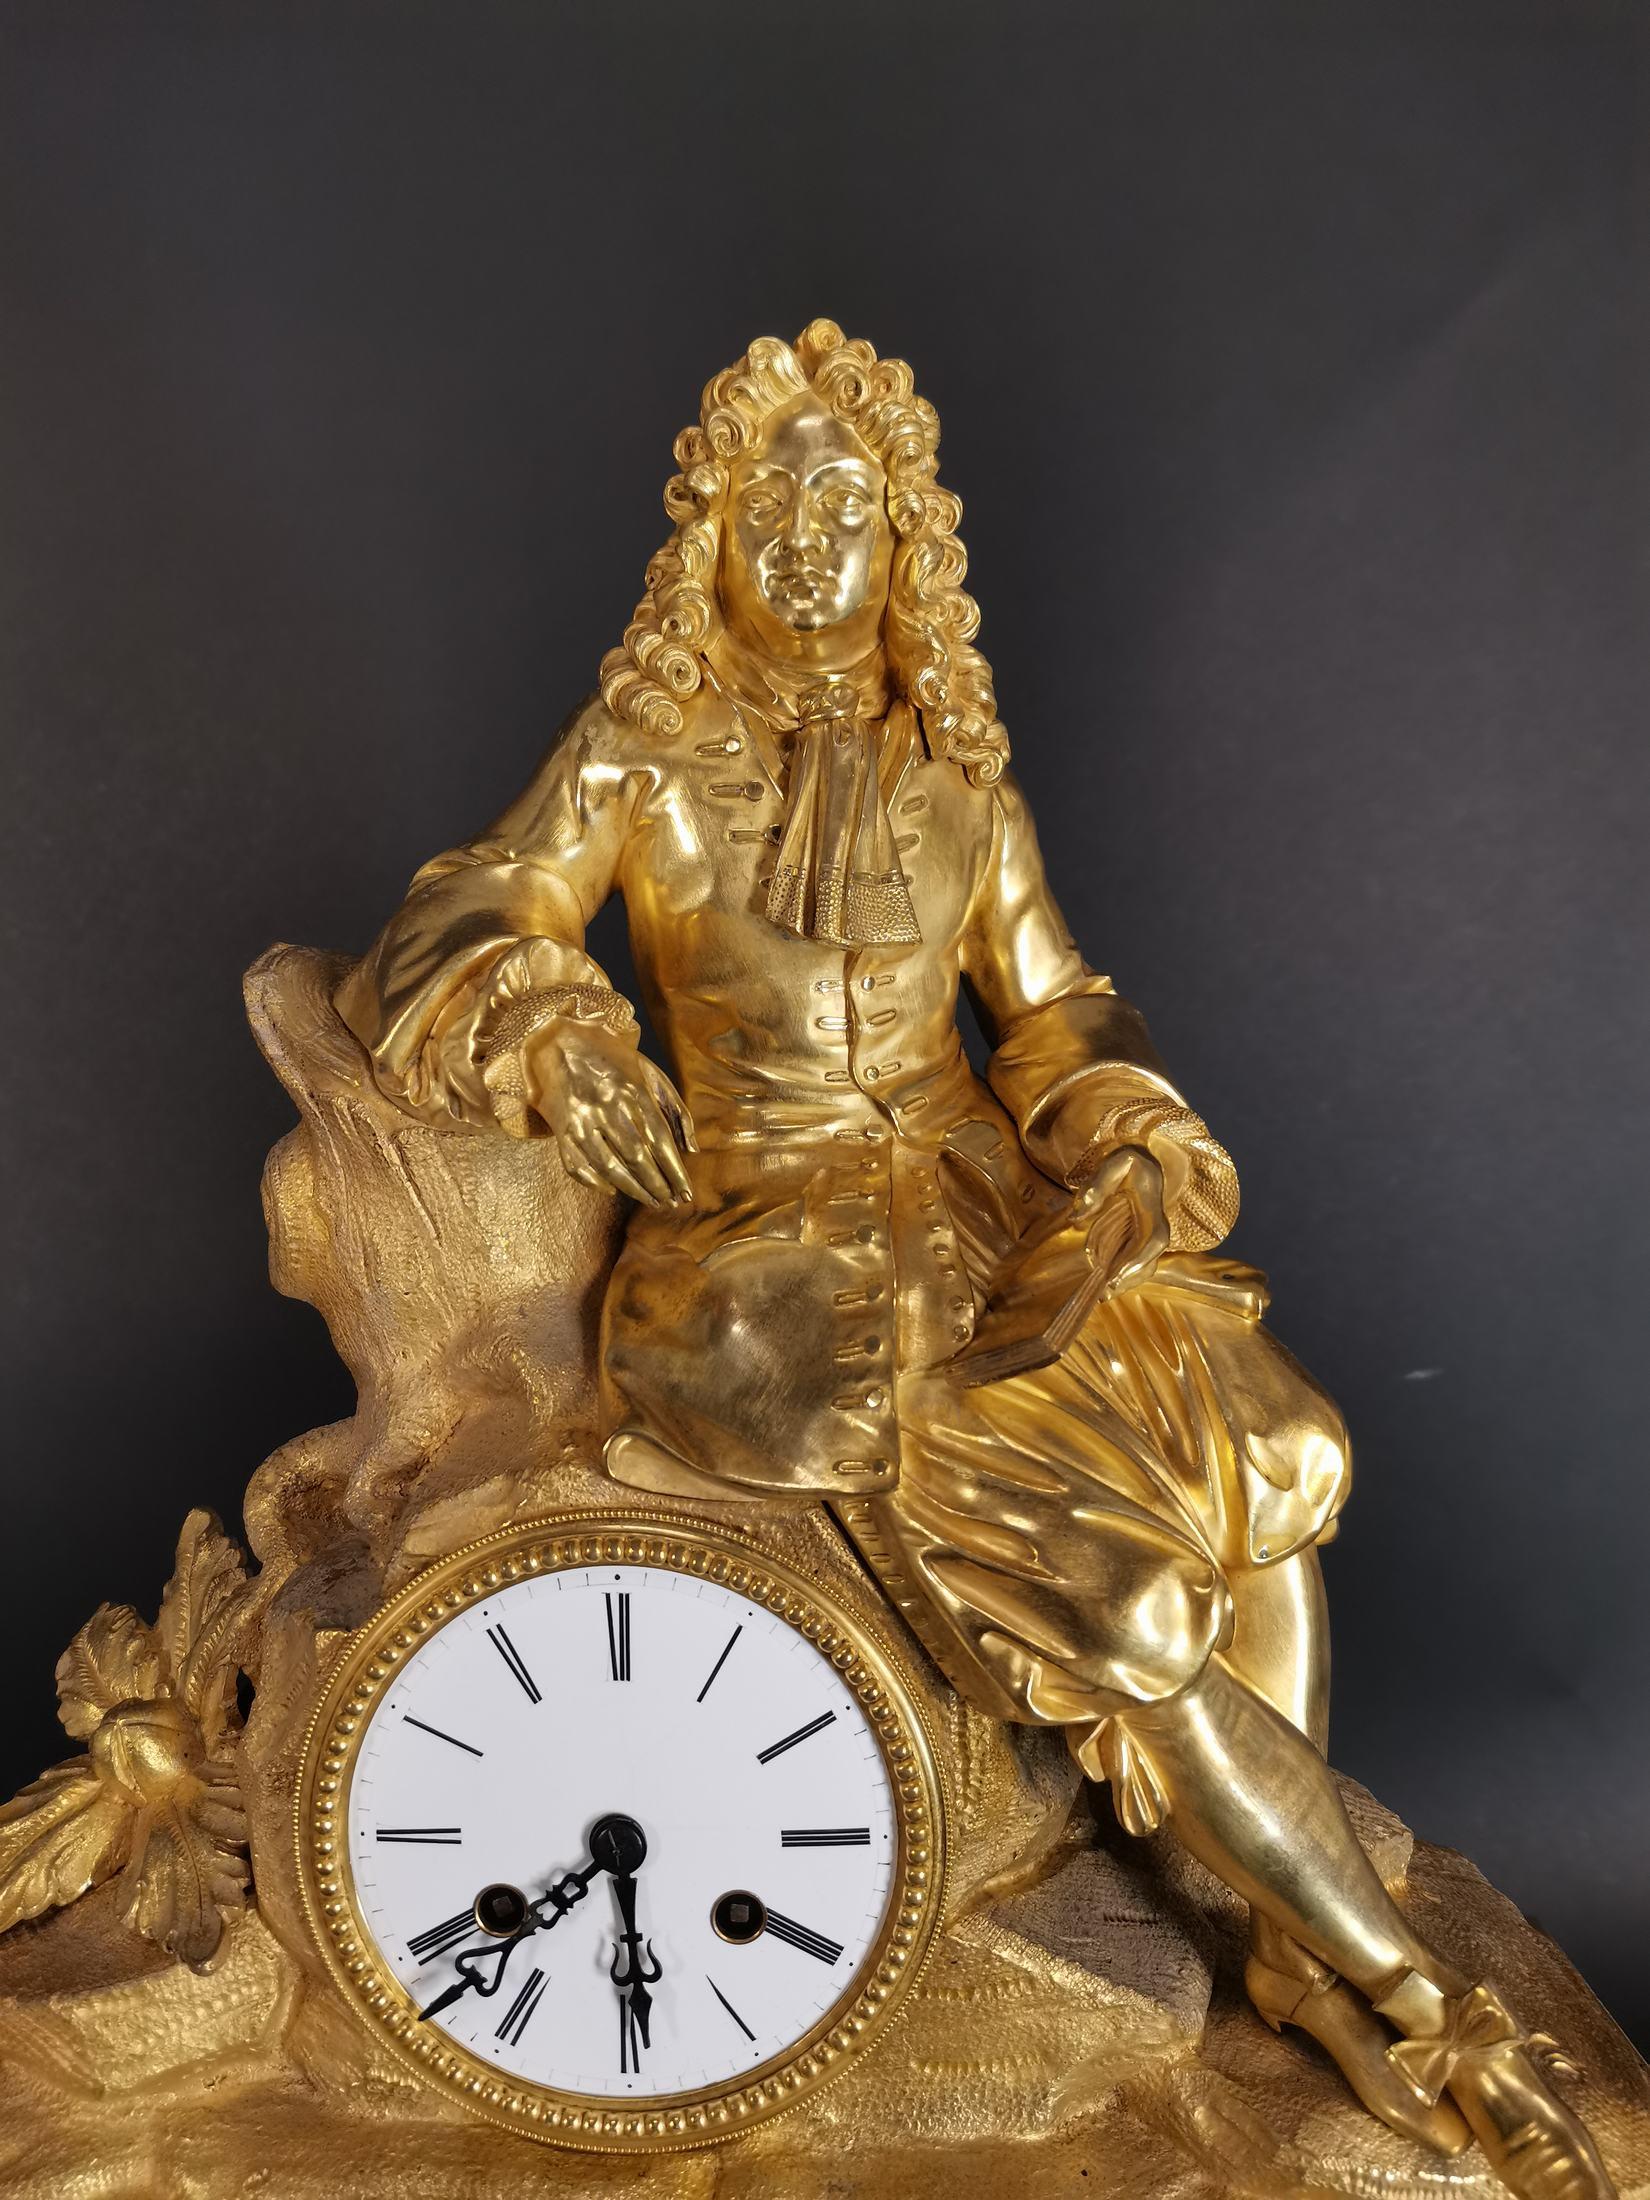 Large Gilded Bronze Clock with Louis XIV Figure, 18th Century For Sale 3